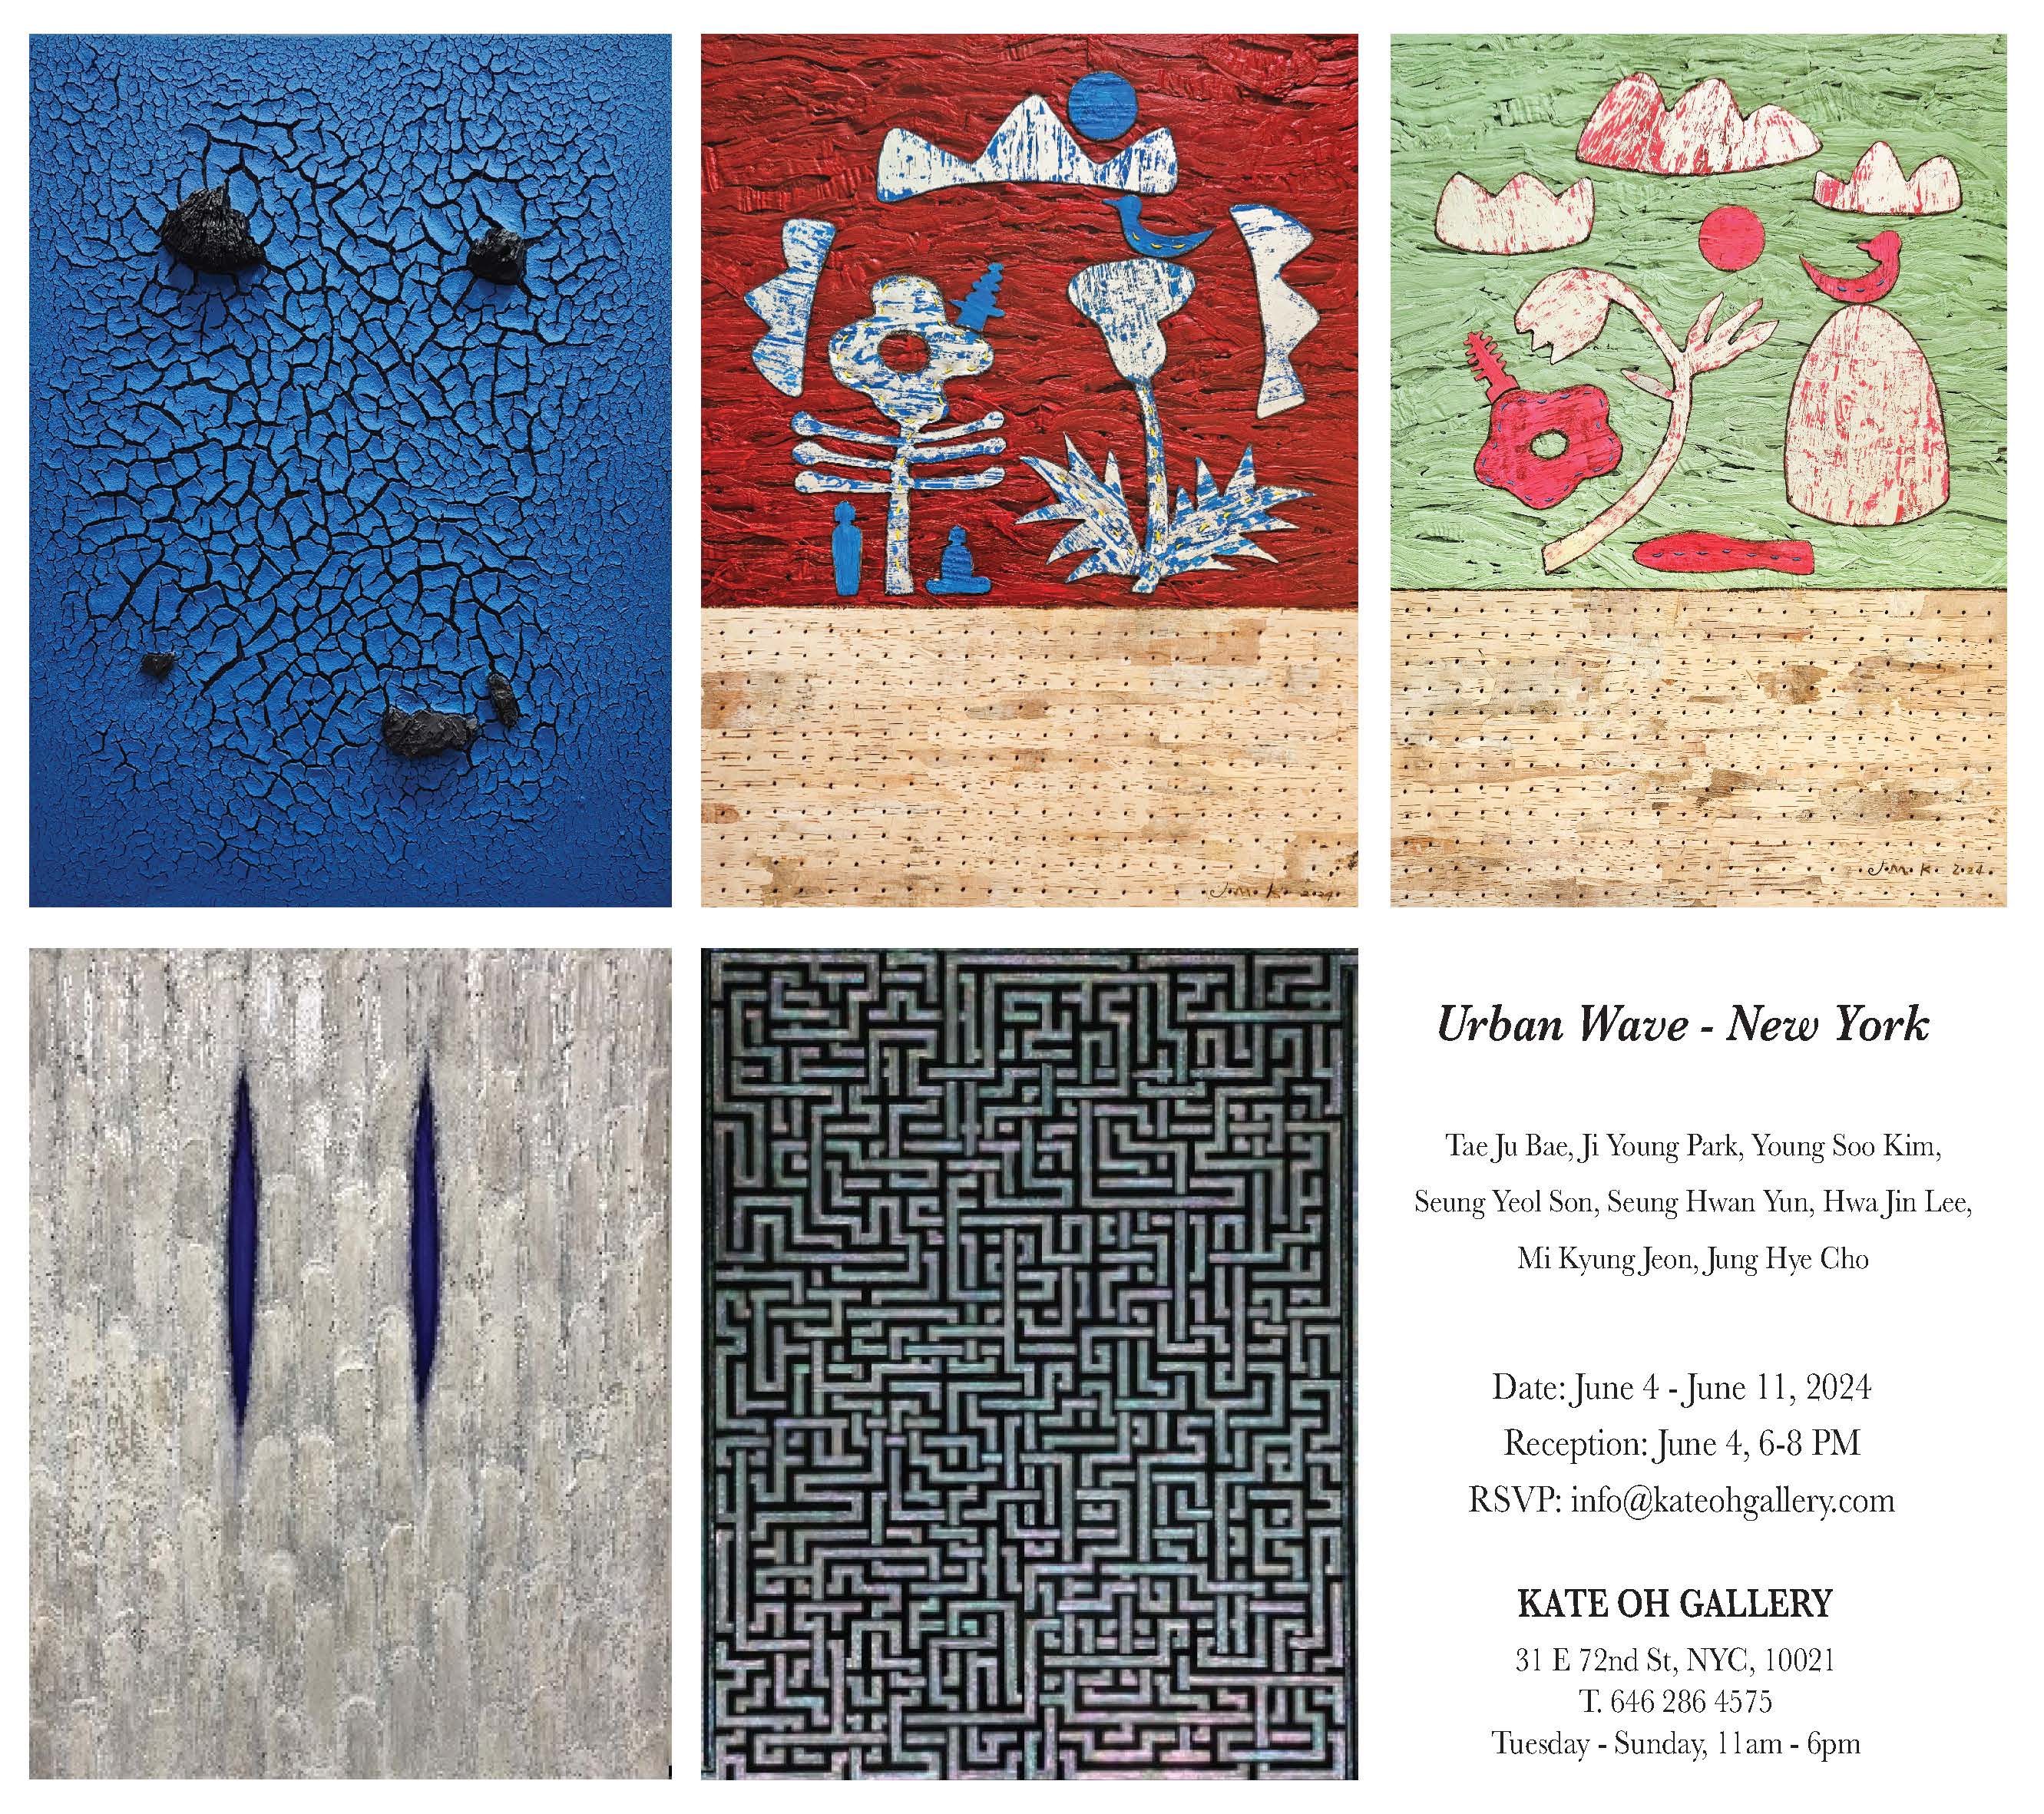 "Urban Wave - New York" Group Exhibition at the Kate Oh Gallery